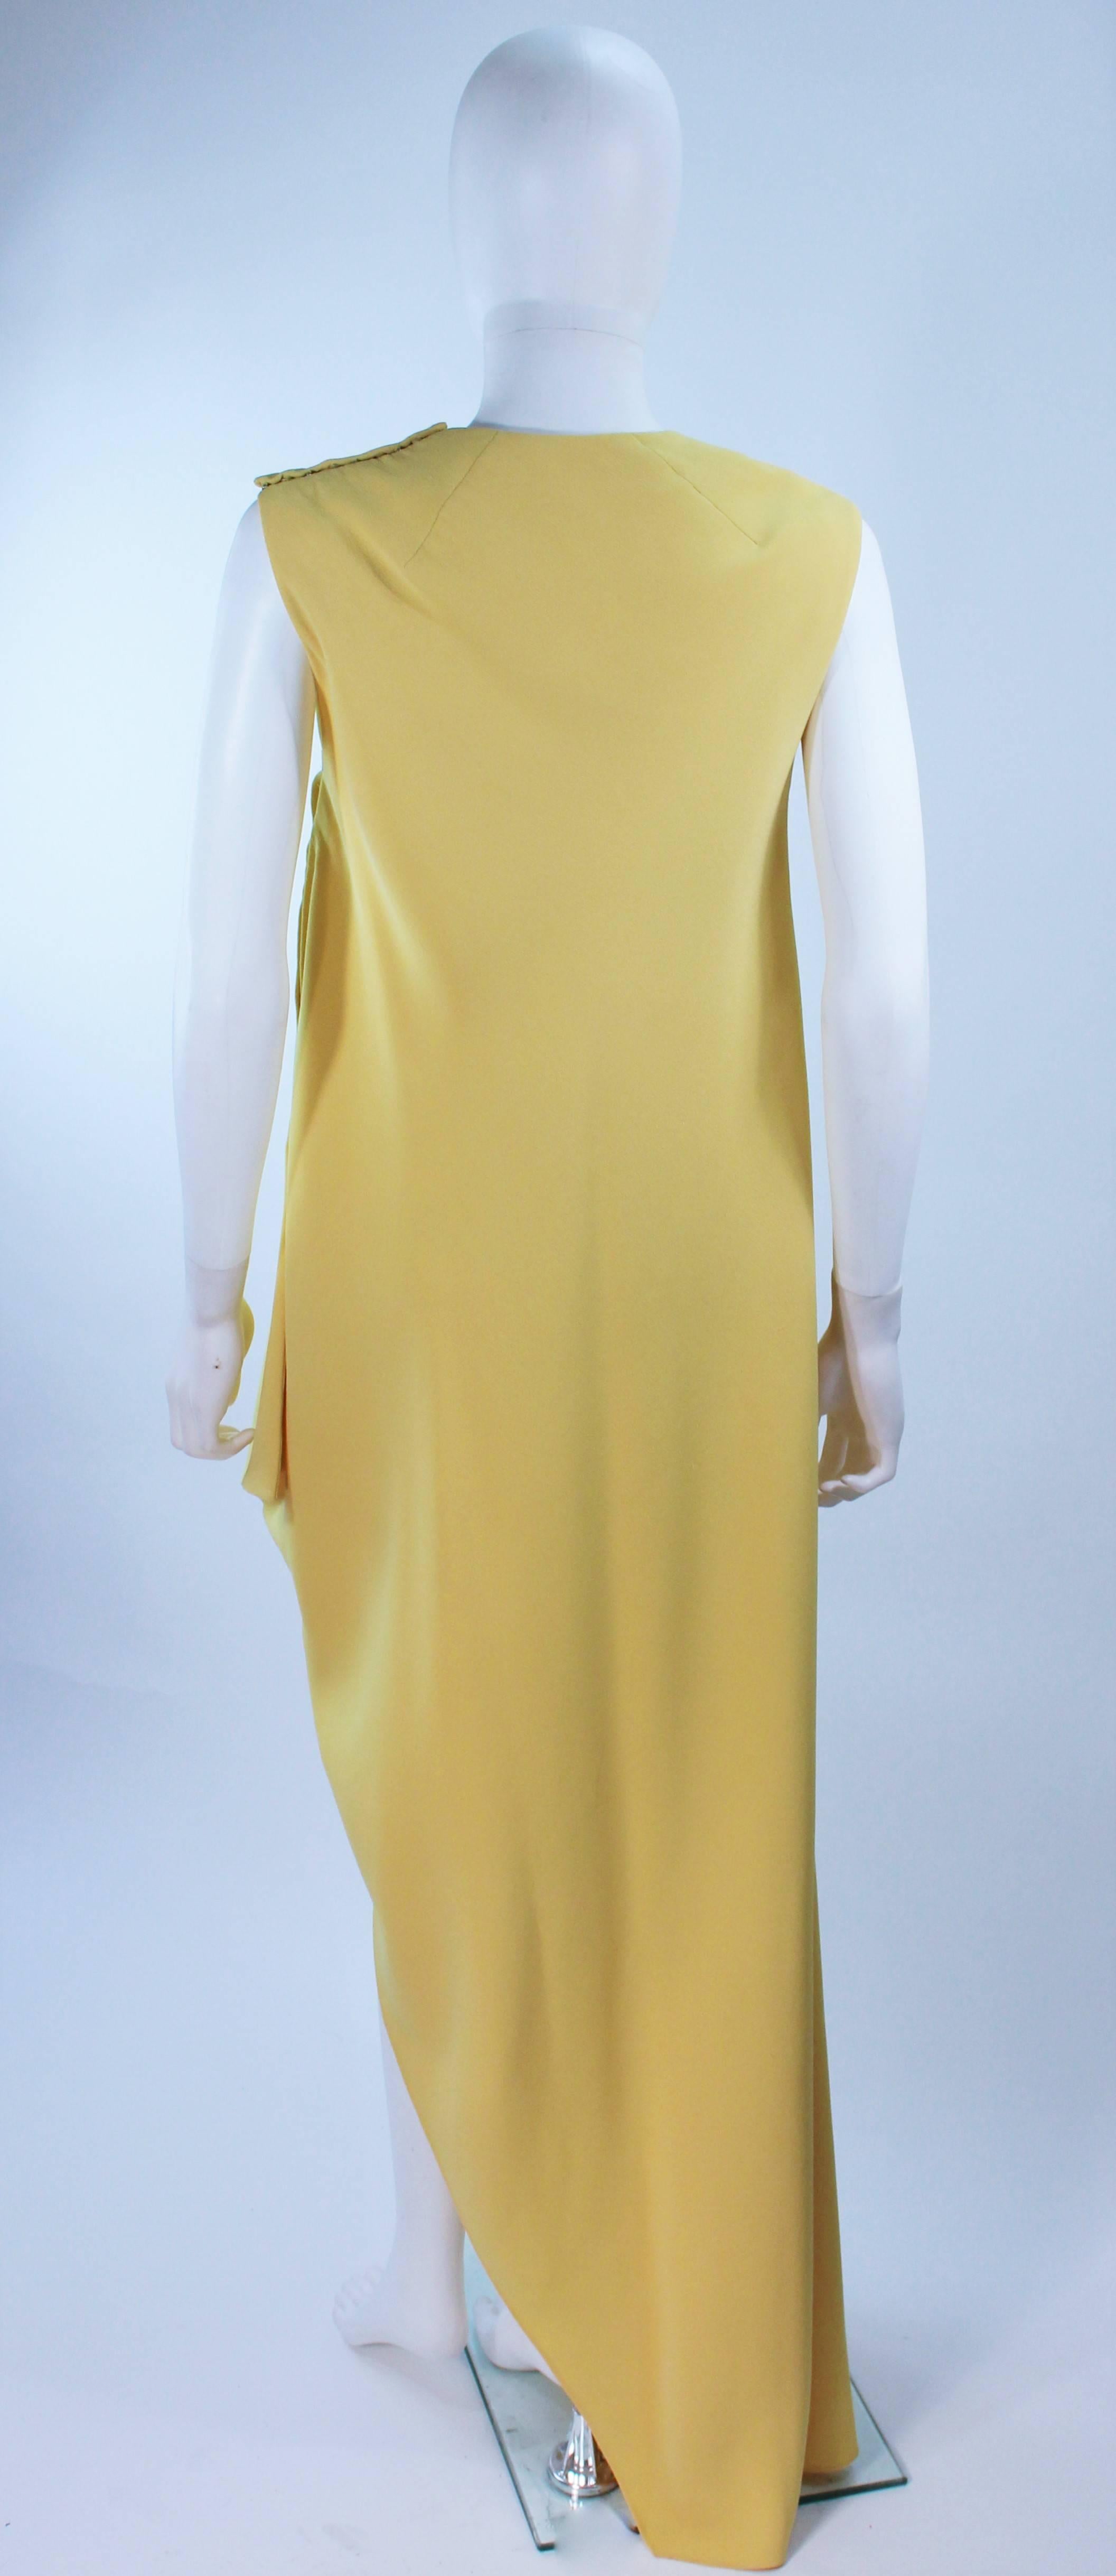 MADAME GRES HAUTE COUTURE Betsy Bloomingdale 1960's Yellow Asymmetrical Gown For Sale 1